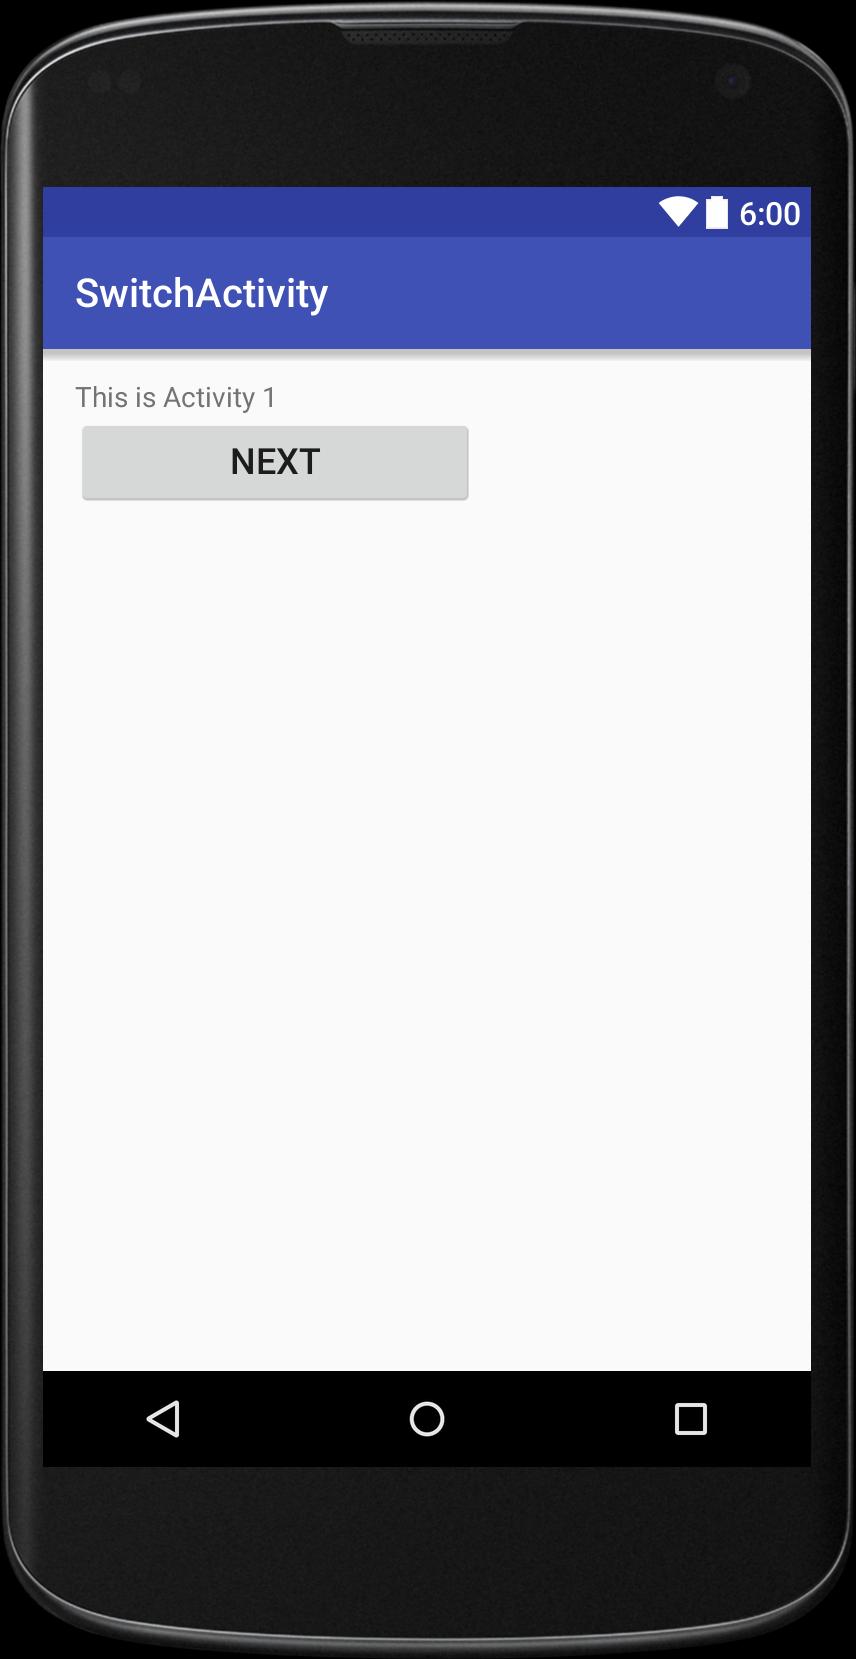 com/apk/res/android" xmlns:tools=com/tools" android:layout_width="match_parent" android:layout_height="match_parent" android:paddingbottom="@dimen/activity_vertical_margin"